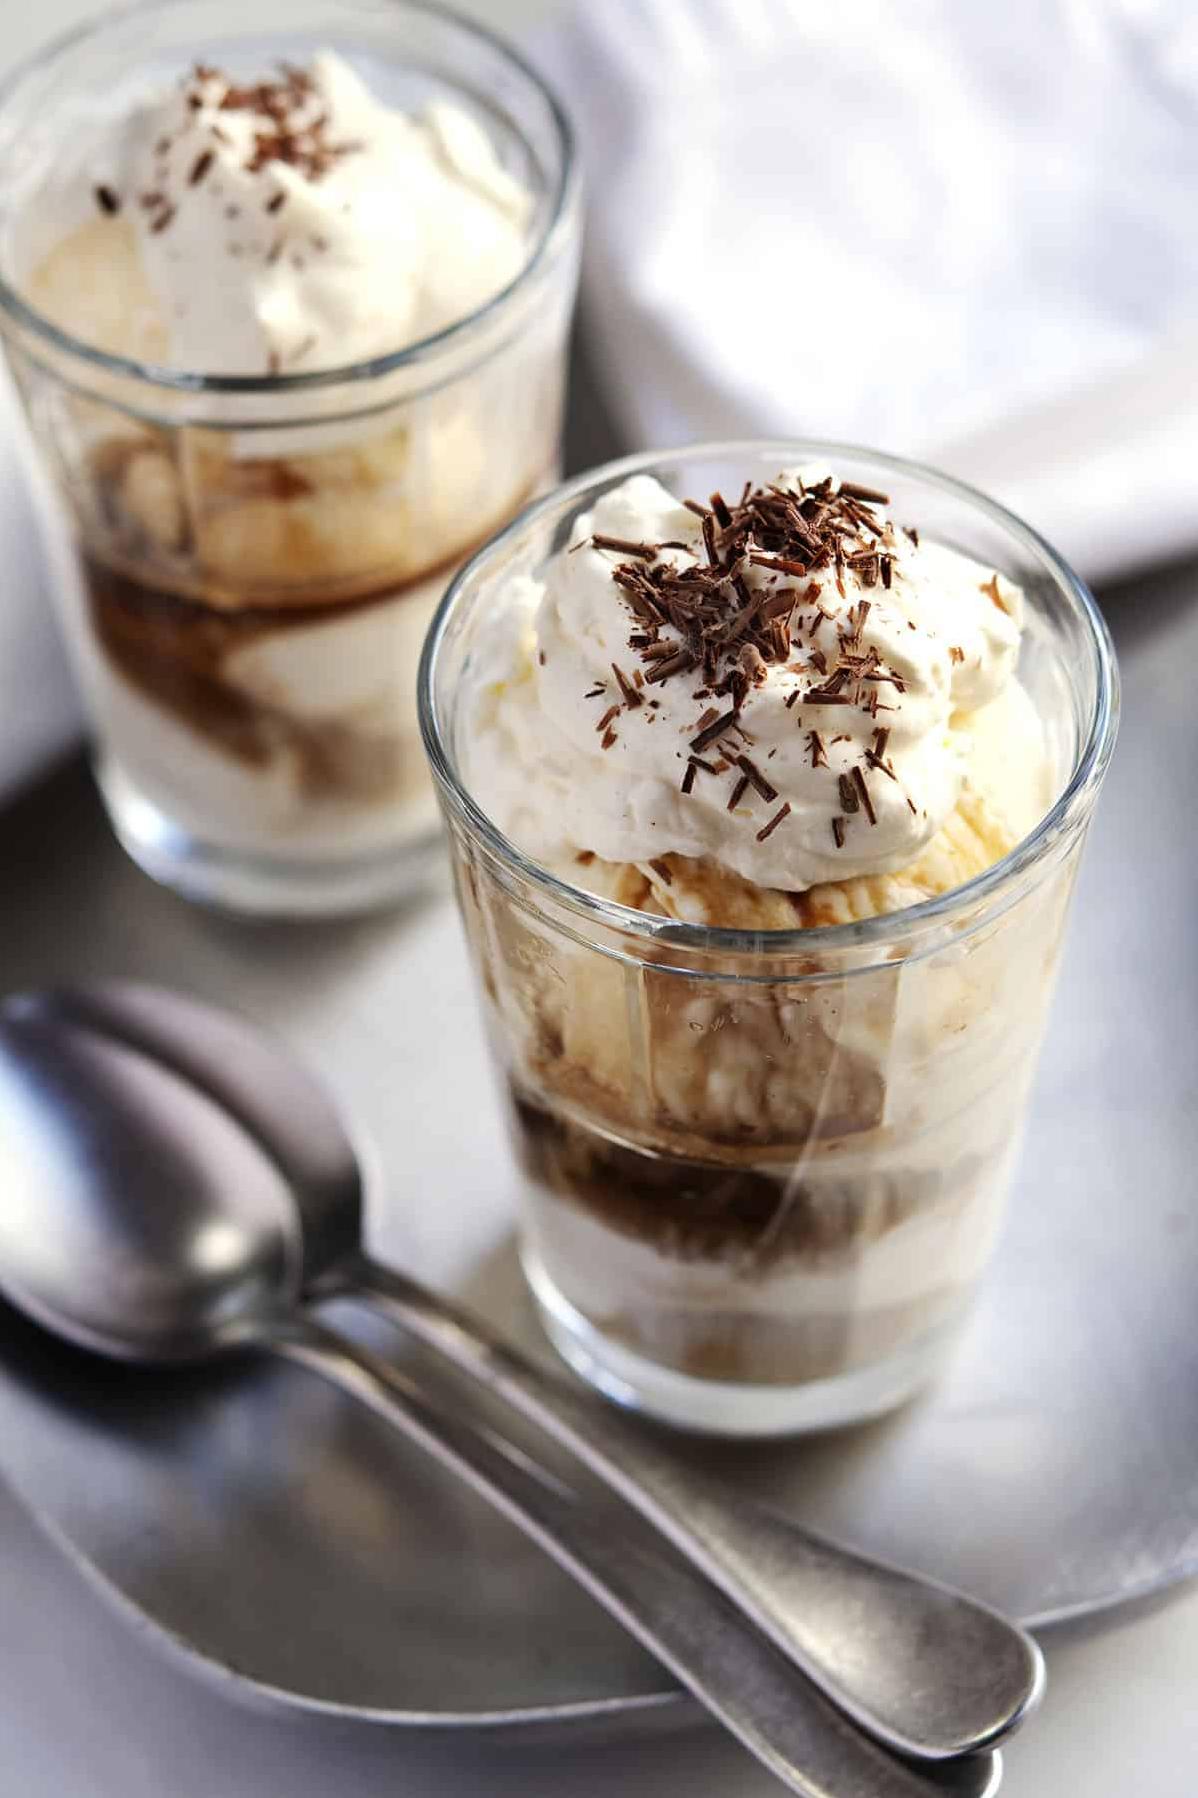  The rich coffee flavor of the espresso pairs perfectly with the sweet vanilla ice cream.